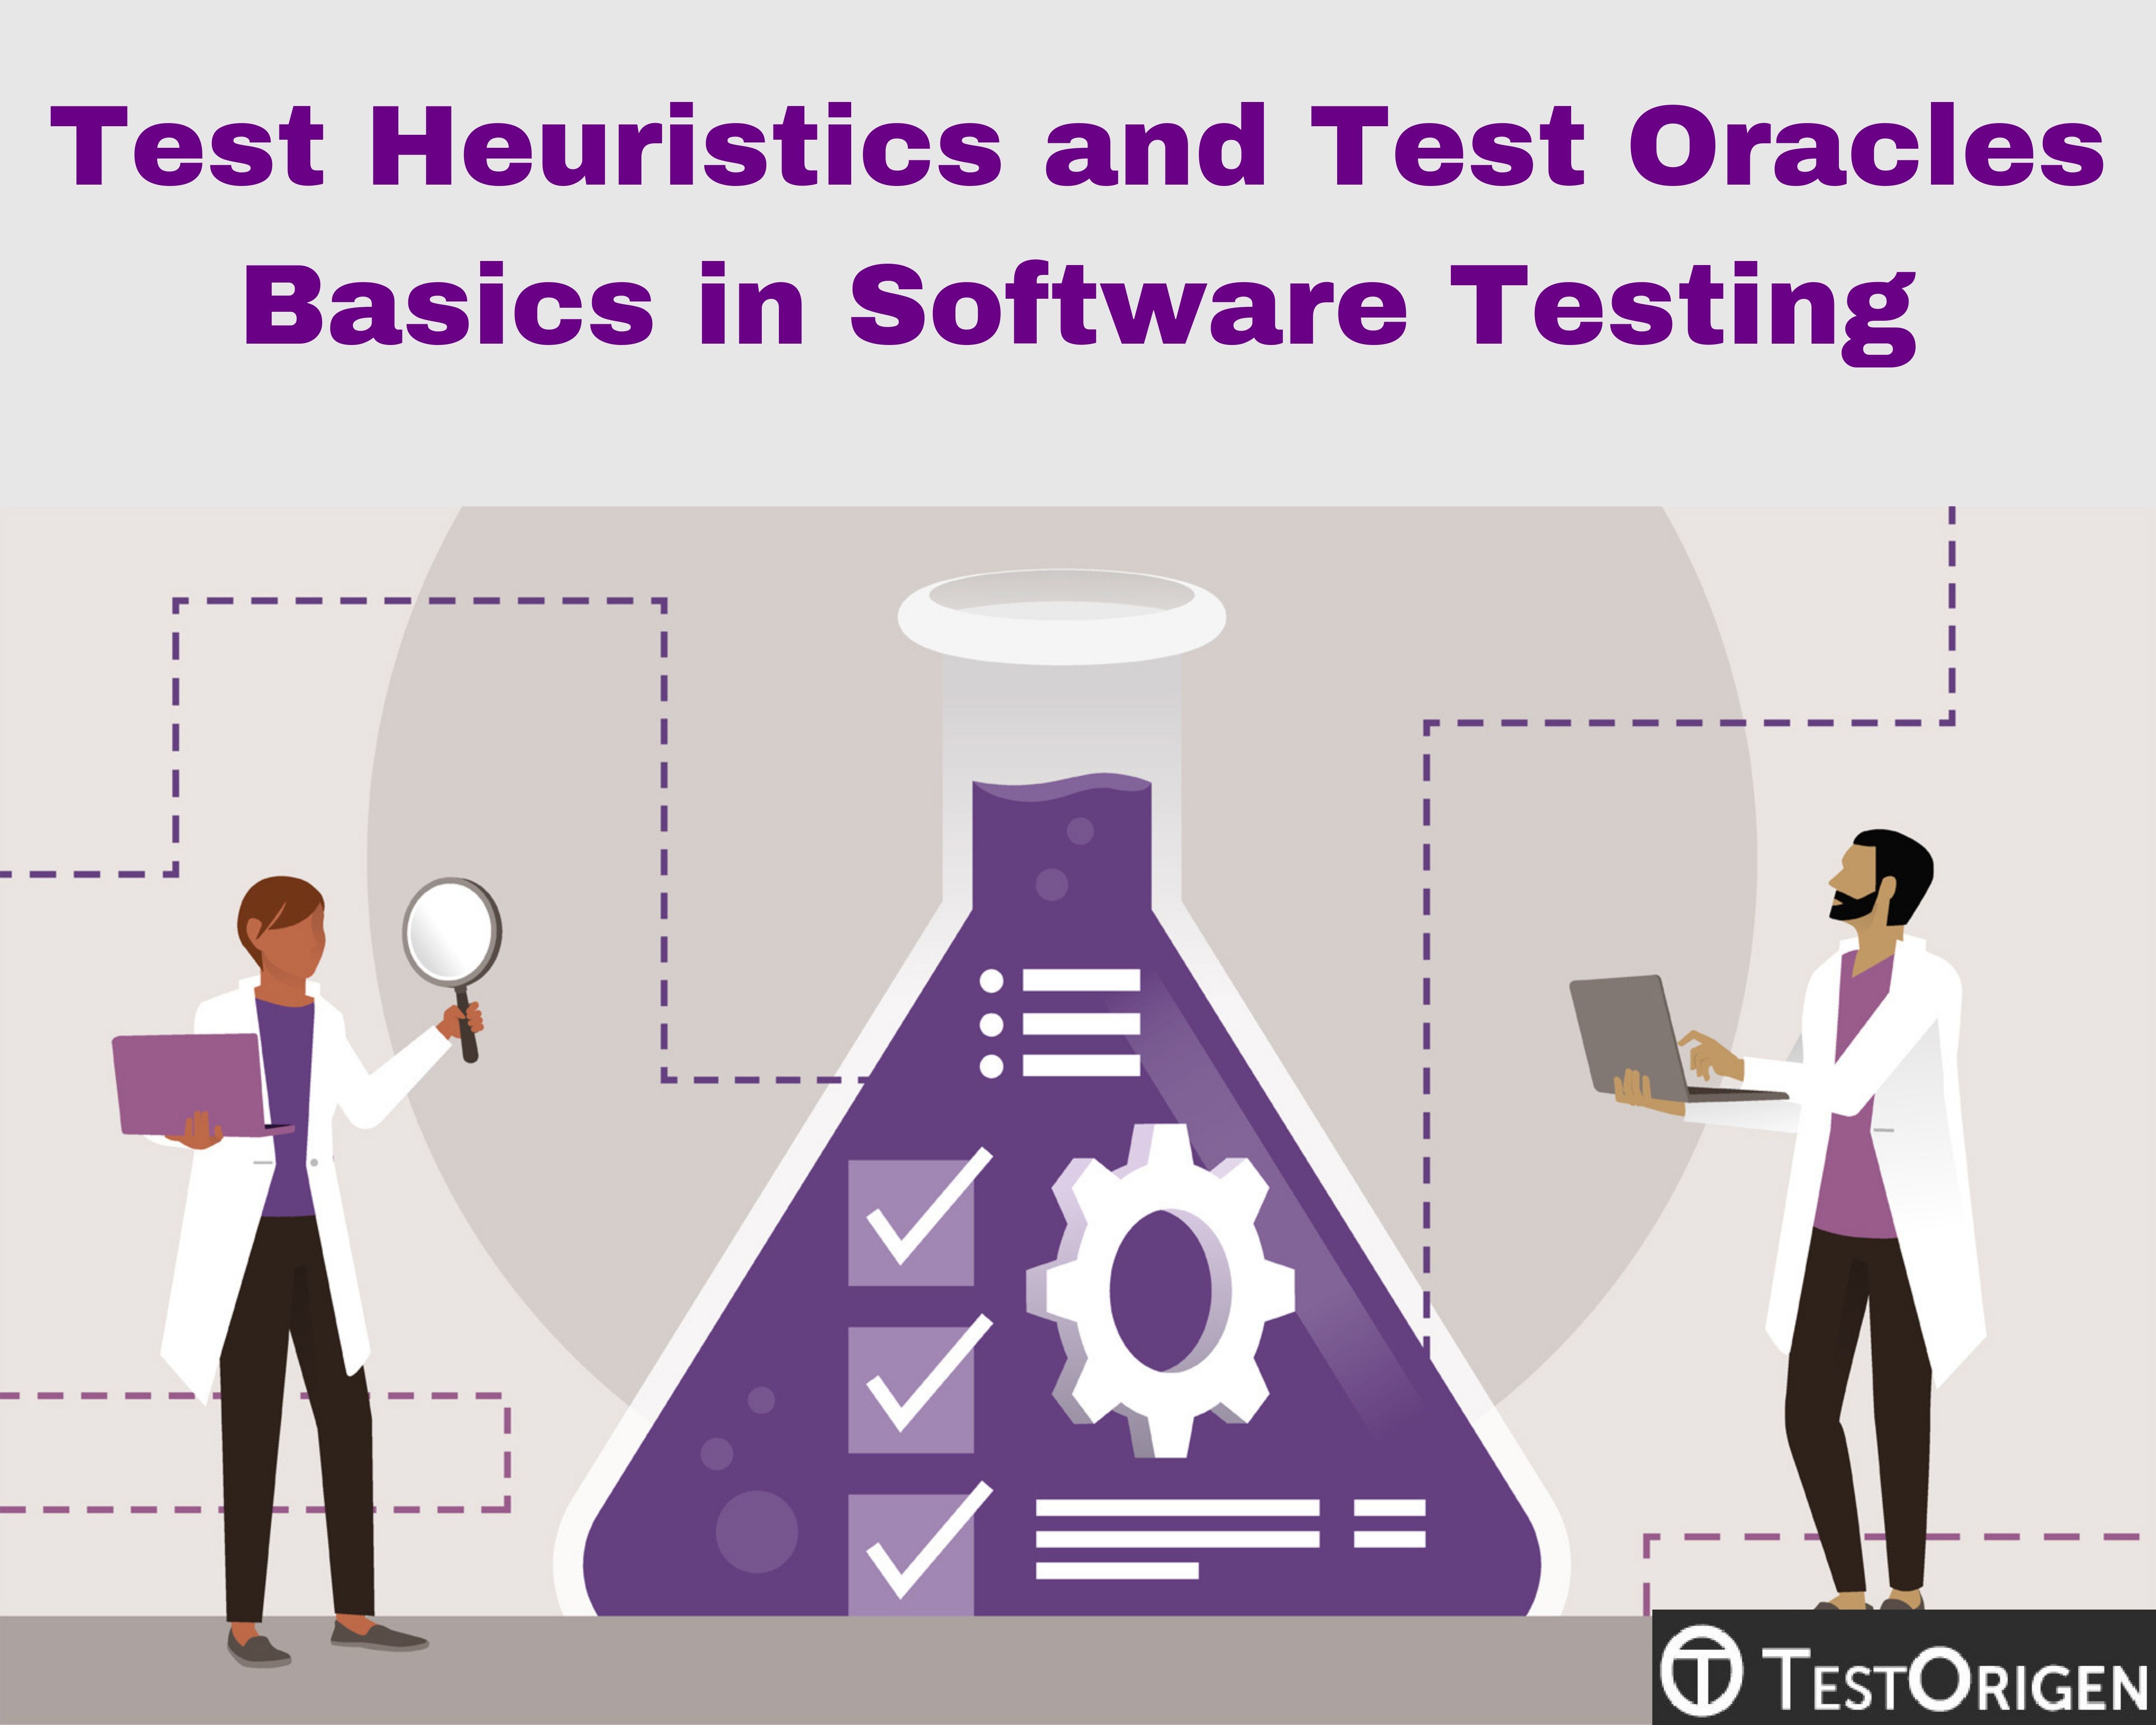 Test Heuristics and Test Oracles Basics in Software Testing